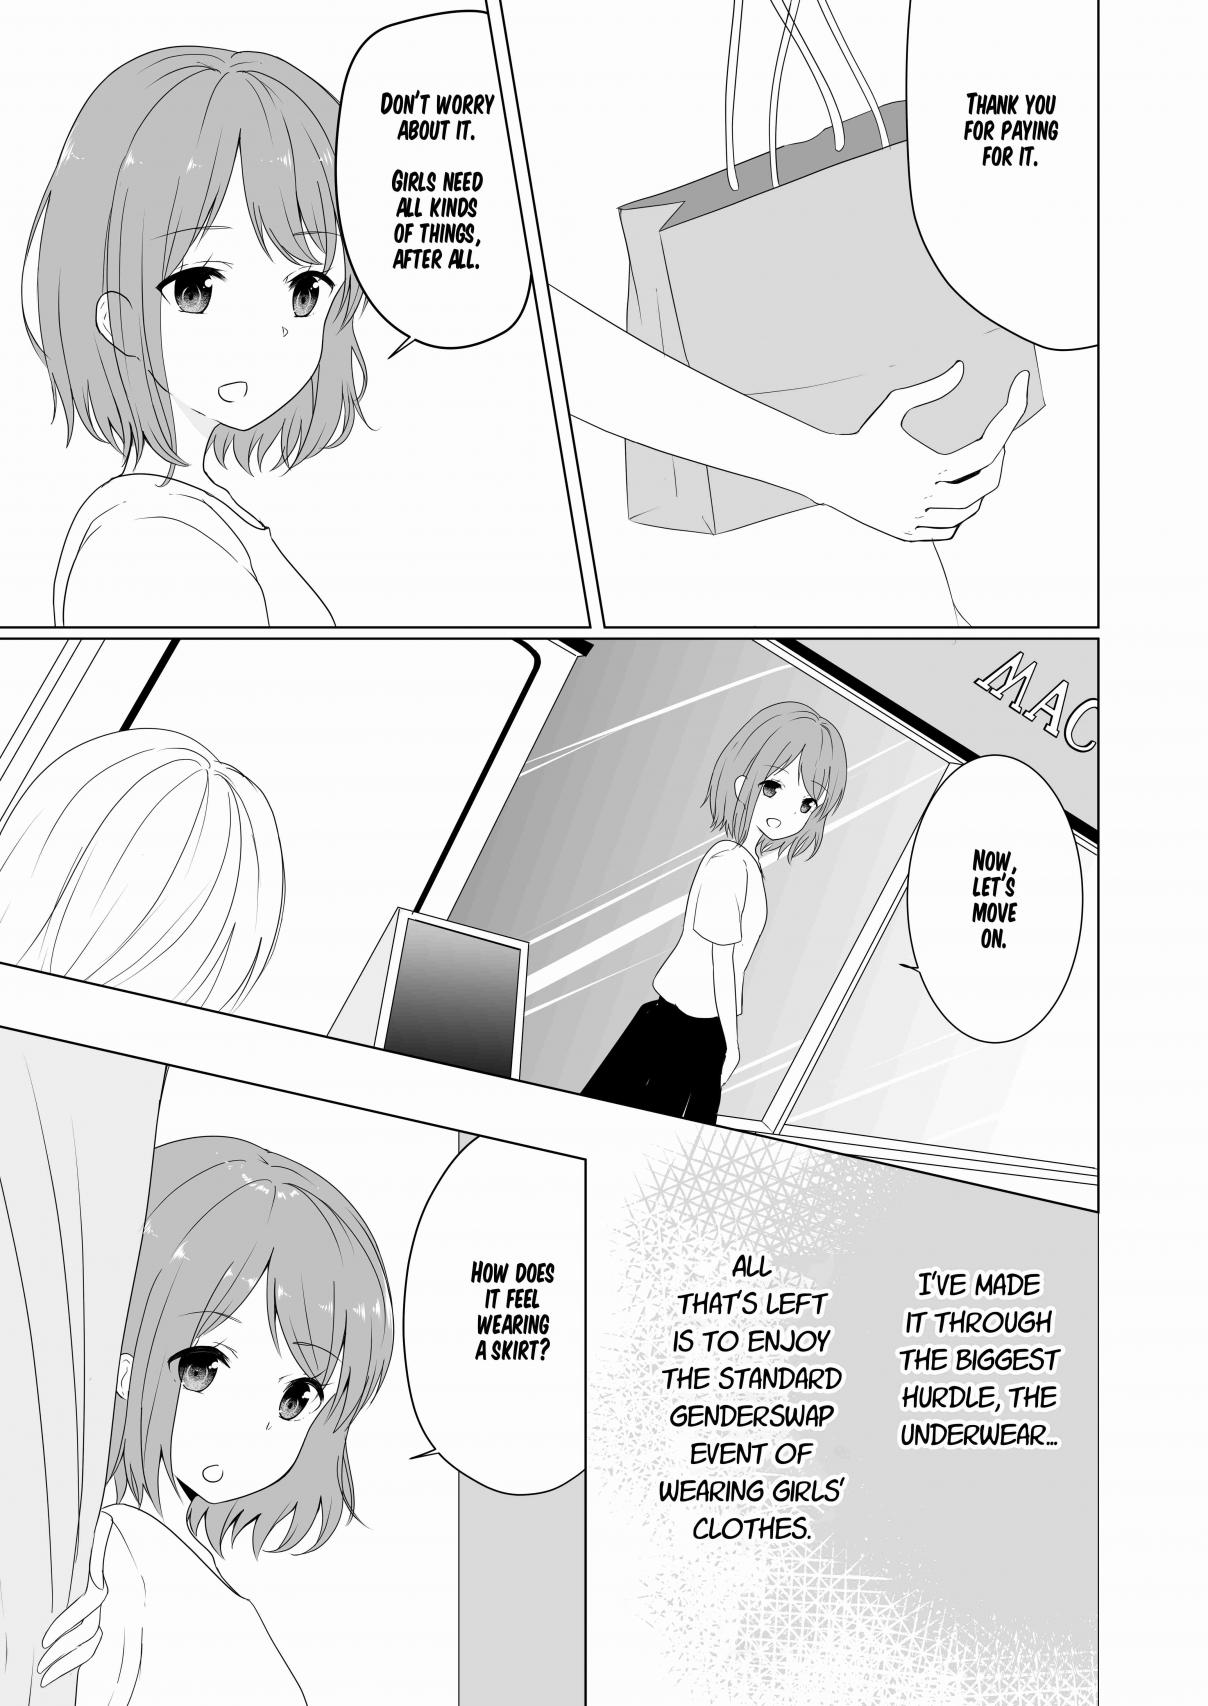 A Boy who Loves Genderswap got Genderswapped so He acts out His Ideal Genderswap Girl Ch. 6